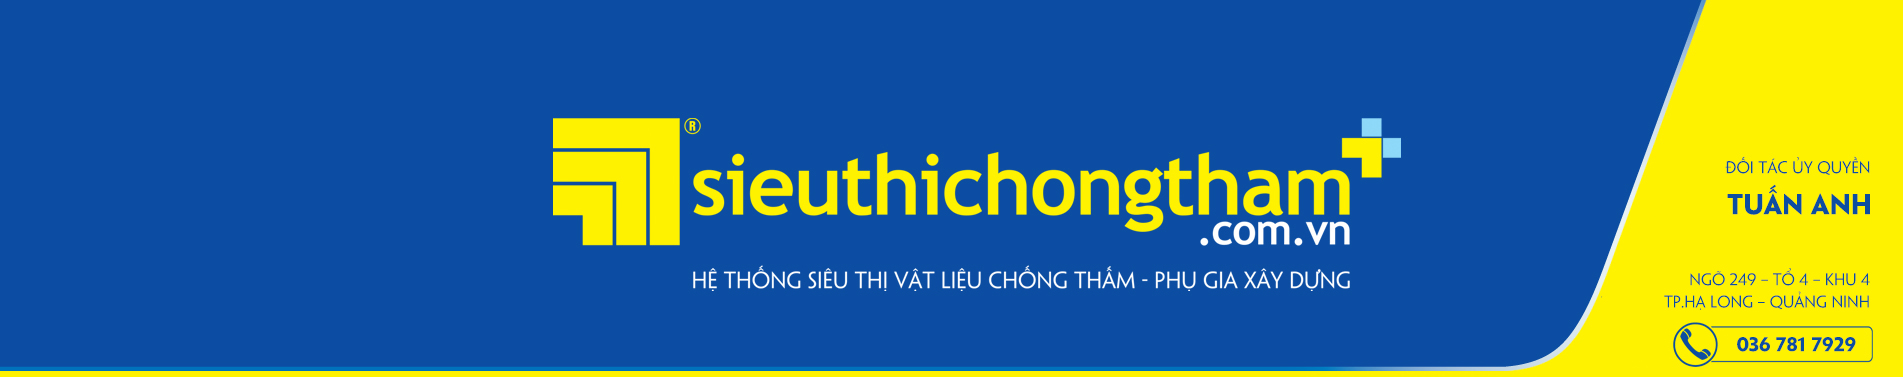 Tuan anh Banner 2